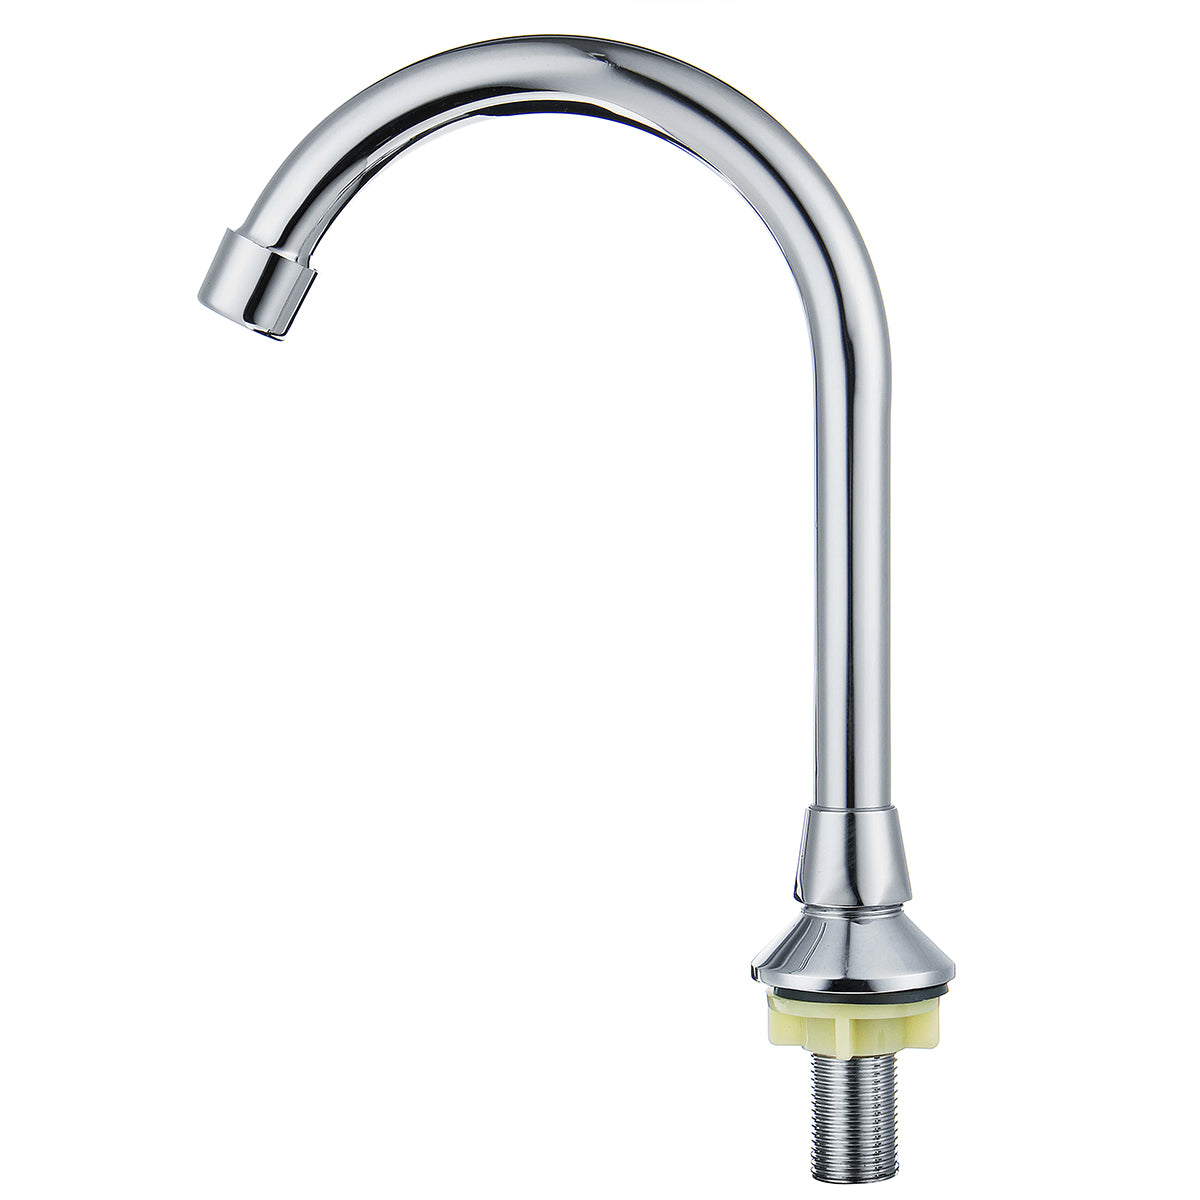 Foot Pedal Sink Faucet Copper Vertical Home Basin Tap With Foot Pedal Switch + Water Outlet Pipe + Connecting Hose